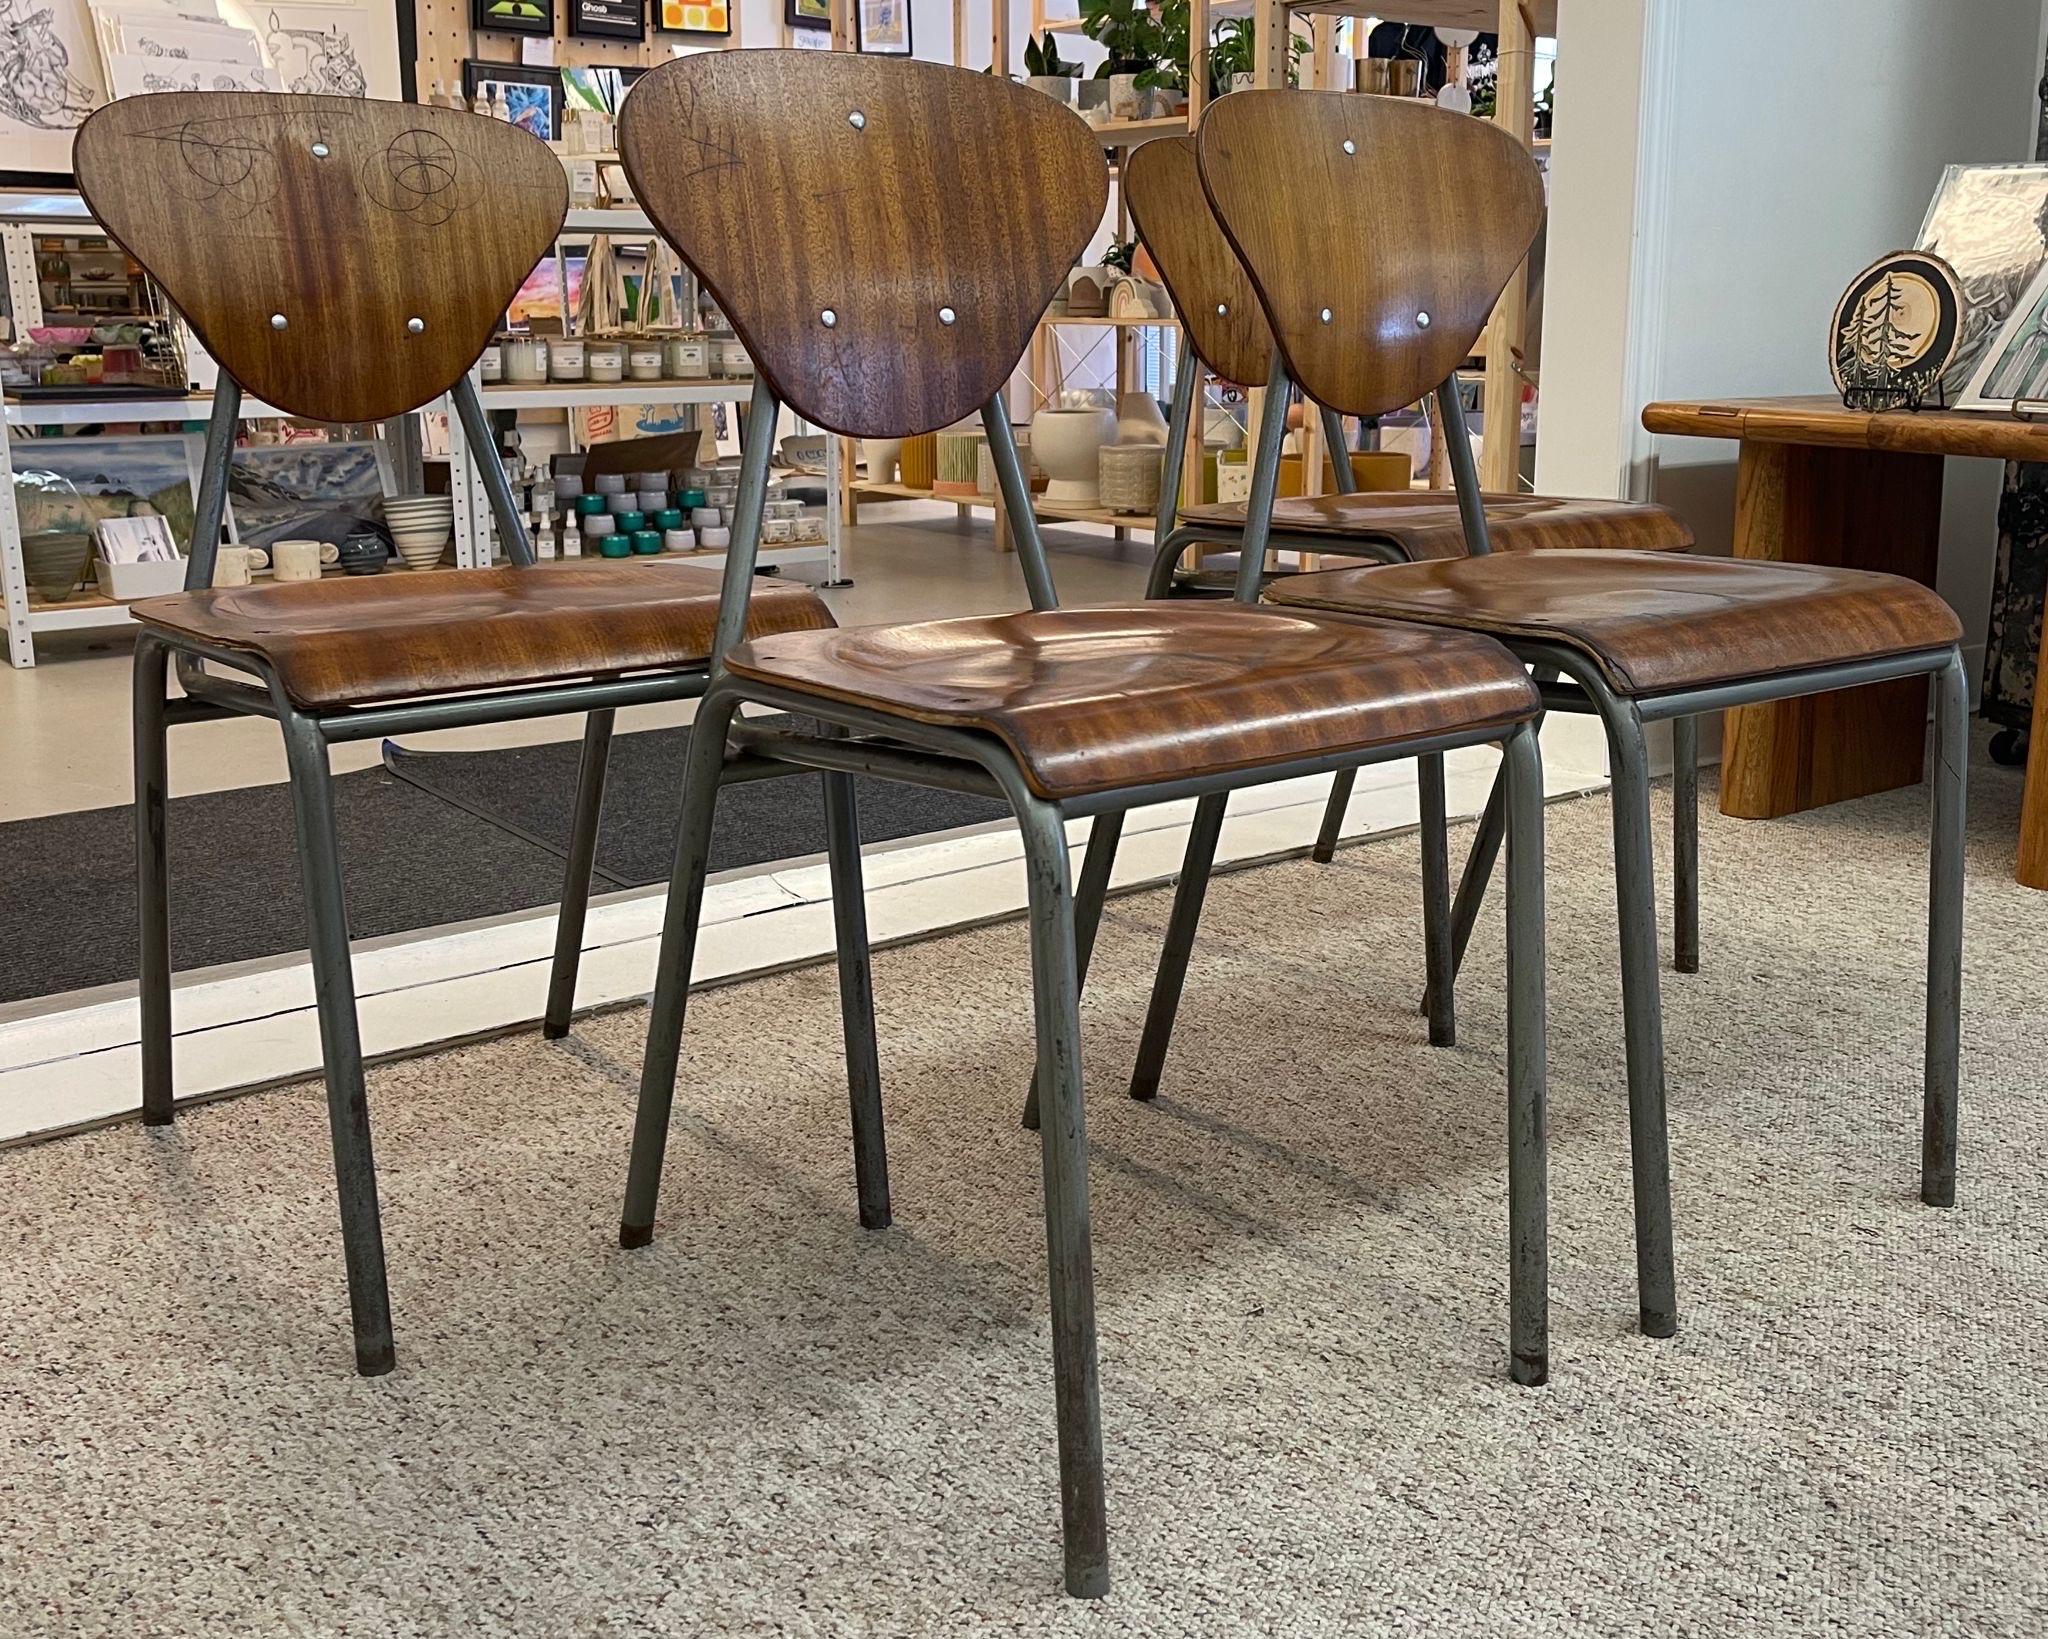 Set of four metal frame chairs with curved wood seats and back. No Makers mark. Vintage condition consistent with age as Pictured.

Dimensions. 16 W ; 16 D ; 32 H